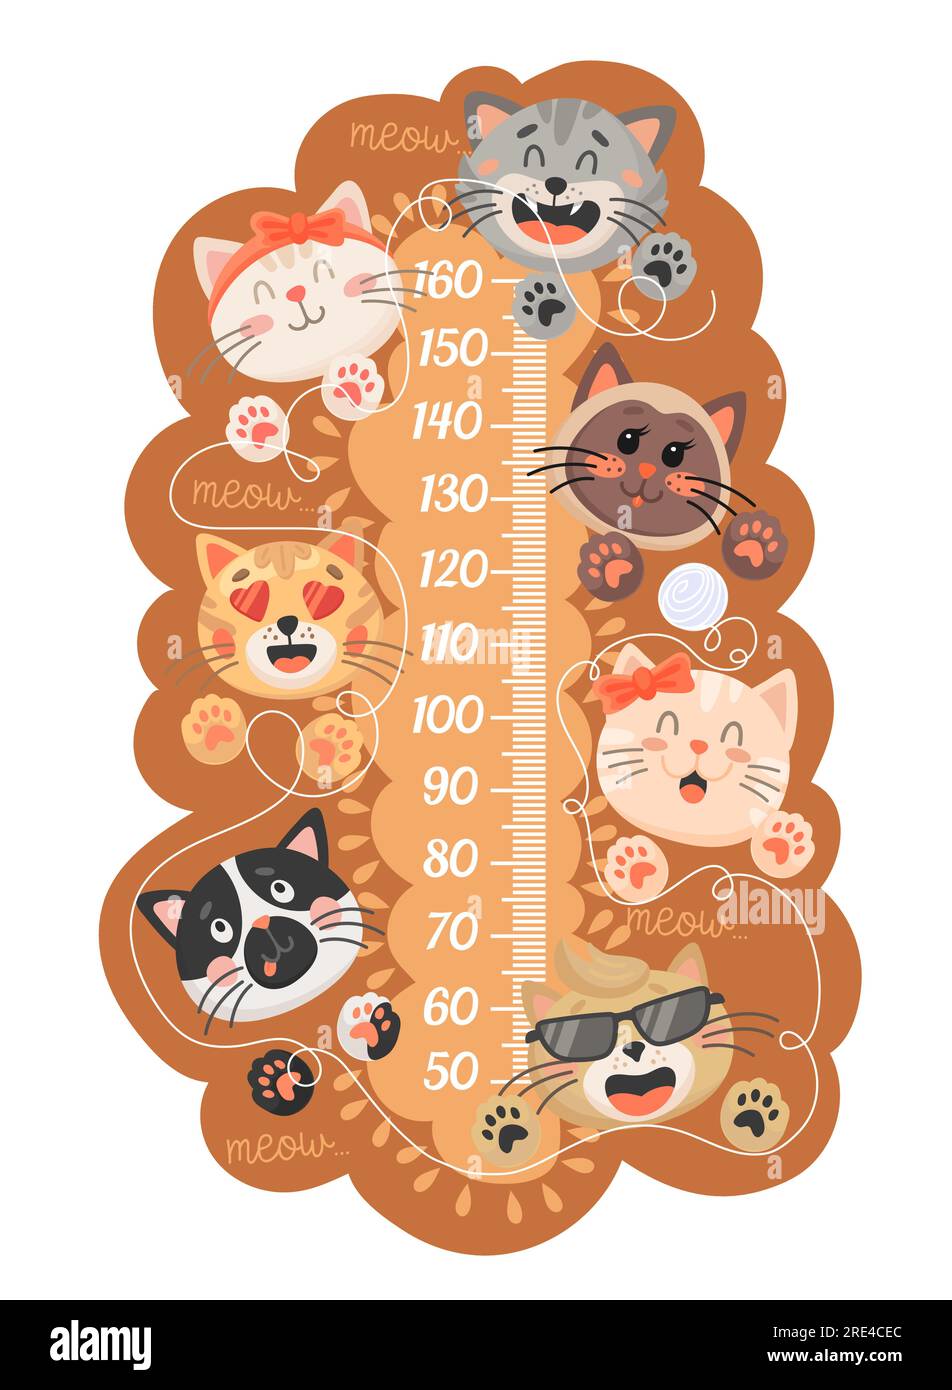 https://c8.alamy.com/comp/2RE4CEC/cartoon-kids-height-chart-funny-cats-and-kittens-growth-measure-meter-vector-wall-sticker-for-children-height-measurement-with-cute-feline-characters-meow-play-with-clew-and-isolated-scale-or-ruler-2RE4CEC.jpg